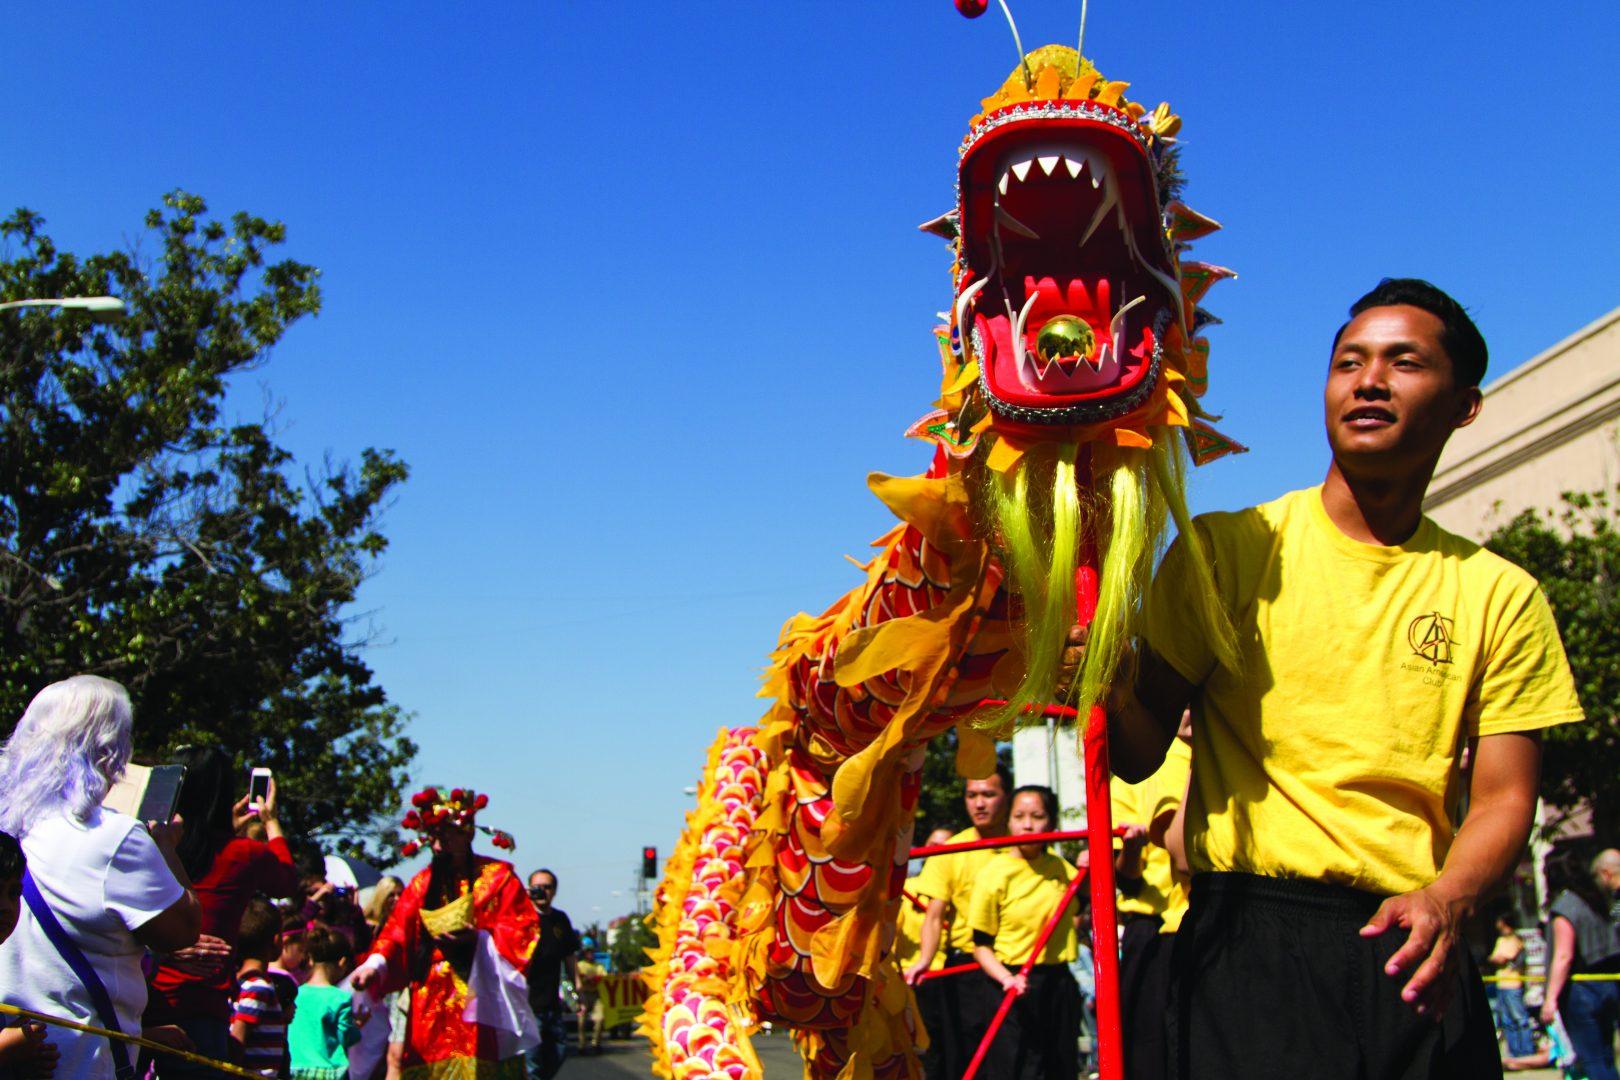 Chinese New Year celebration comes to Fresno